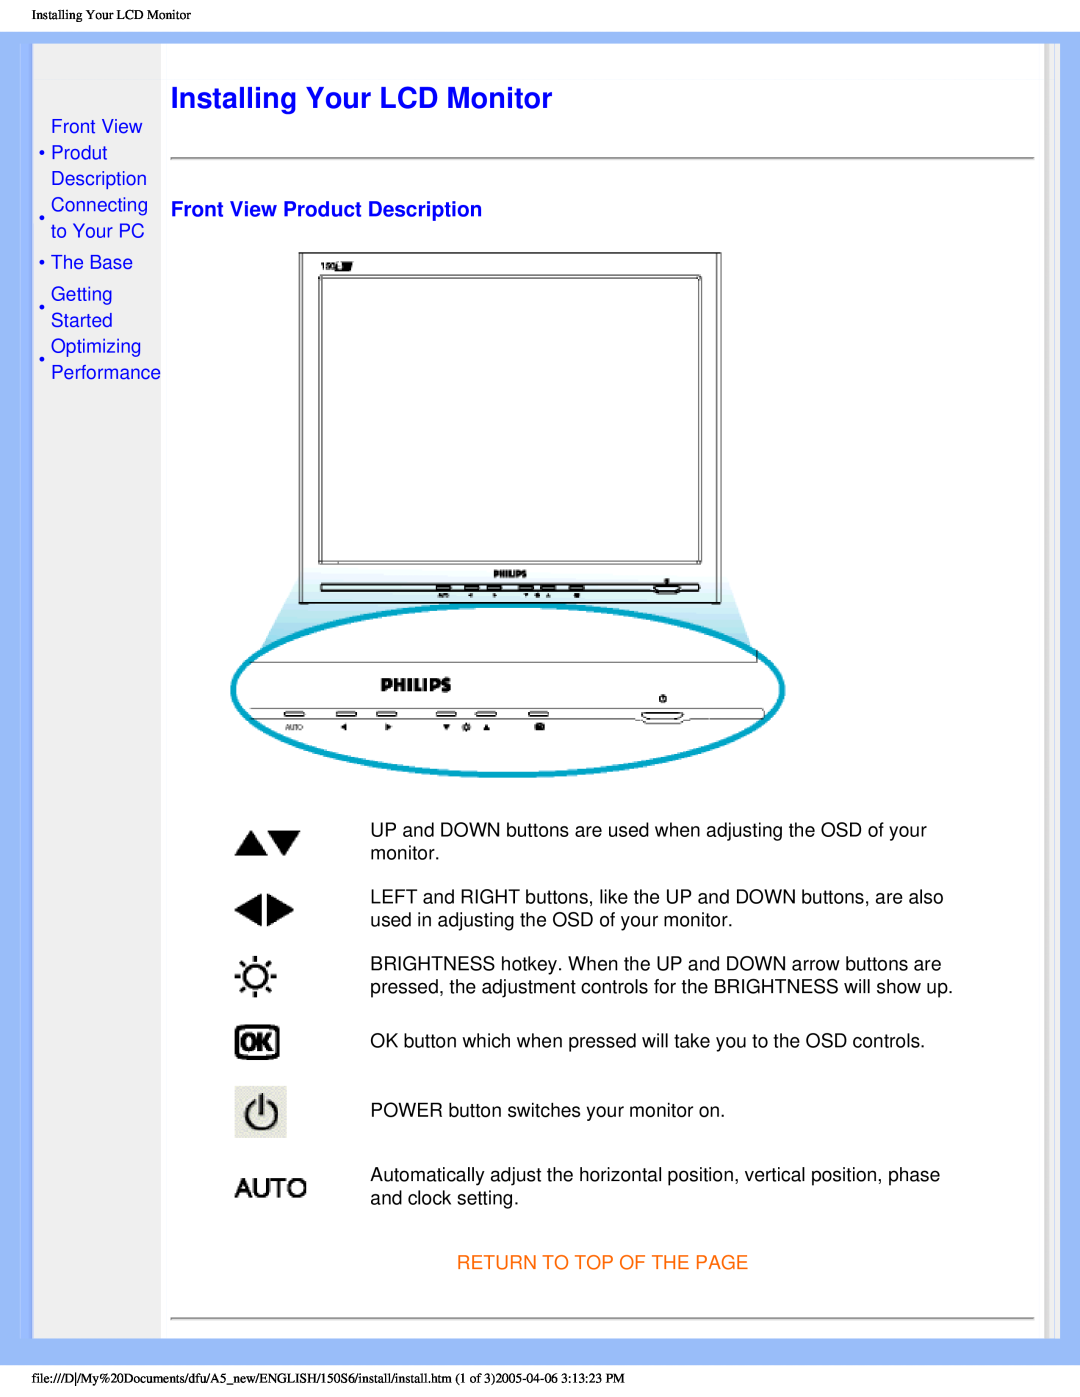 Philips 150S6 user manual Installing Your LCD Monitor, Front View Product Description, Return To Top Of The Page 